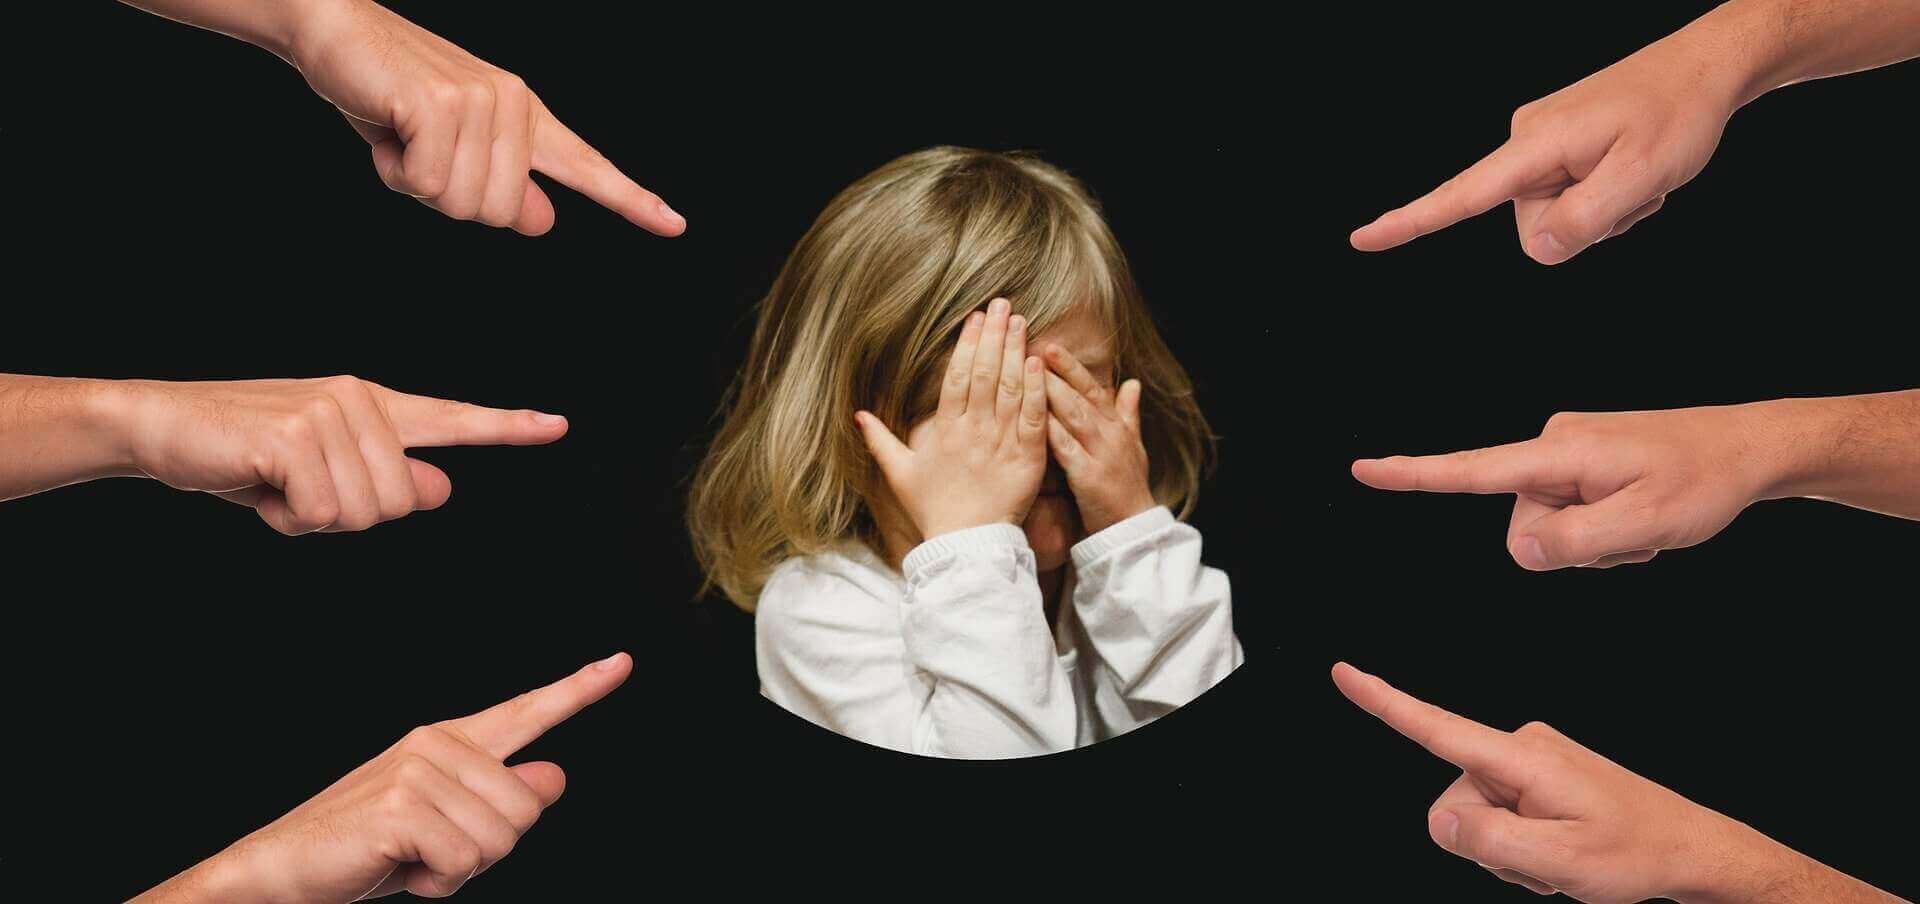 What Are The Bad Effects Of Social Anxiety On Children?